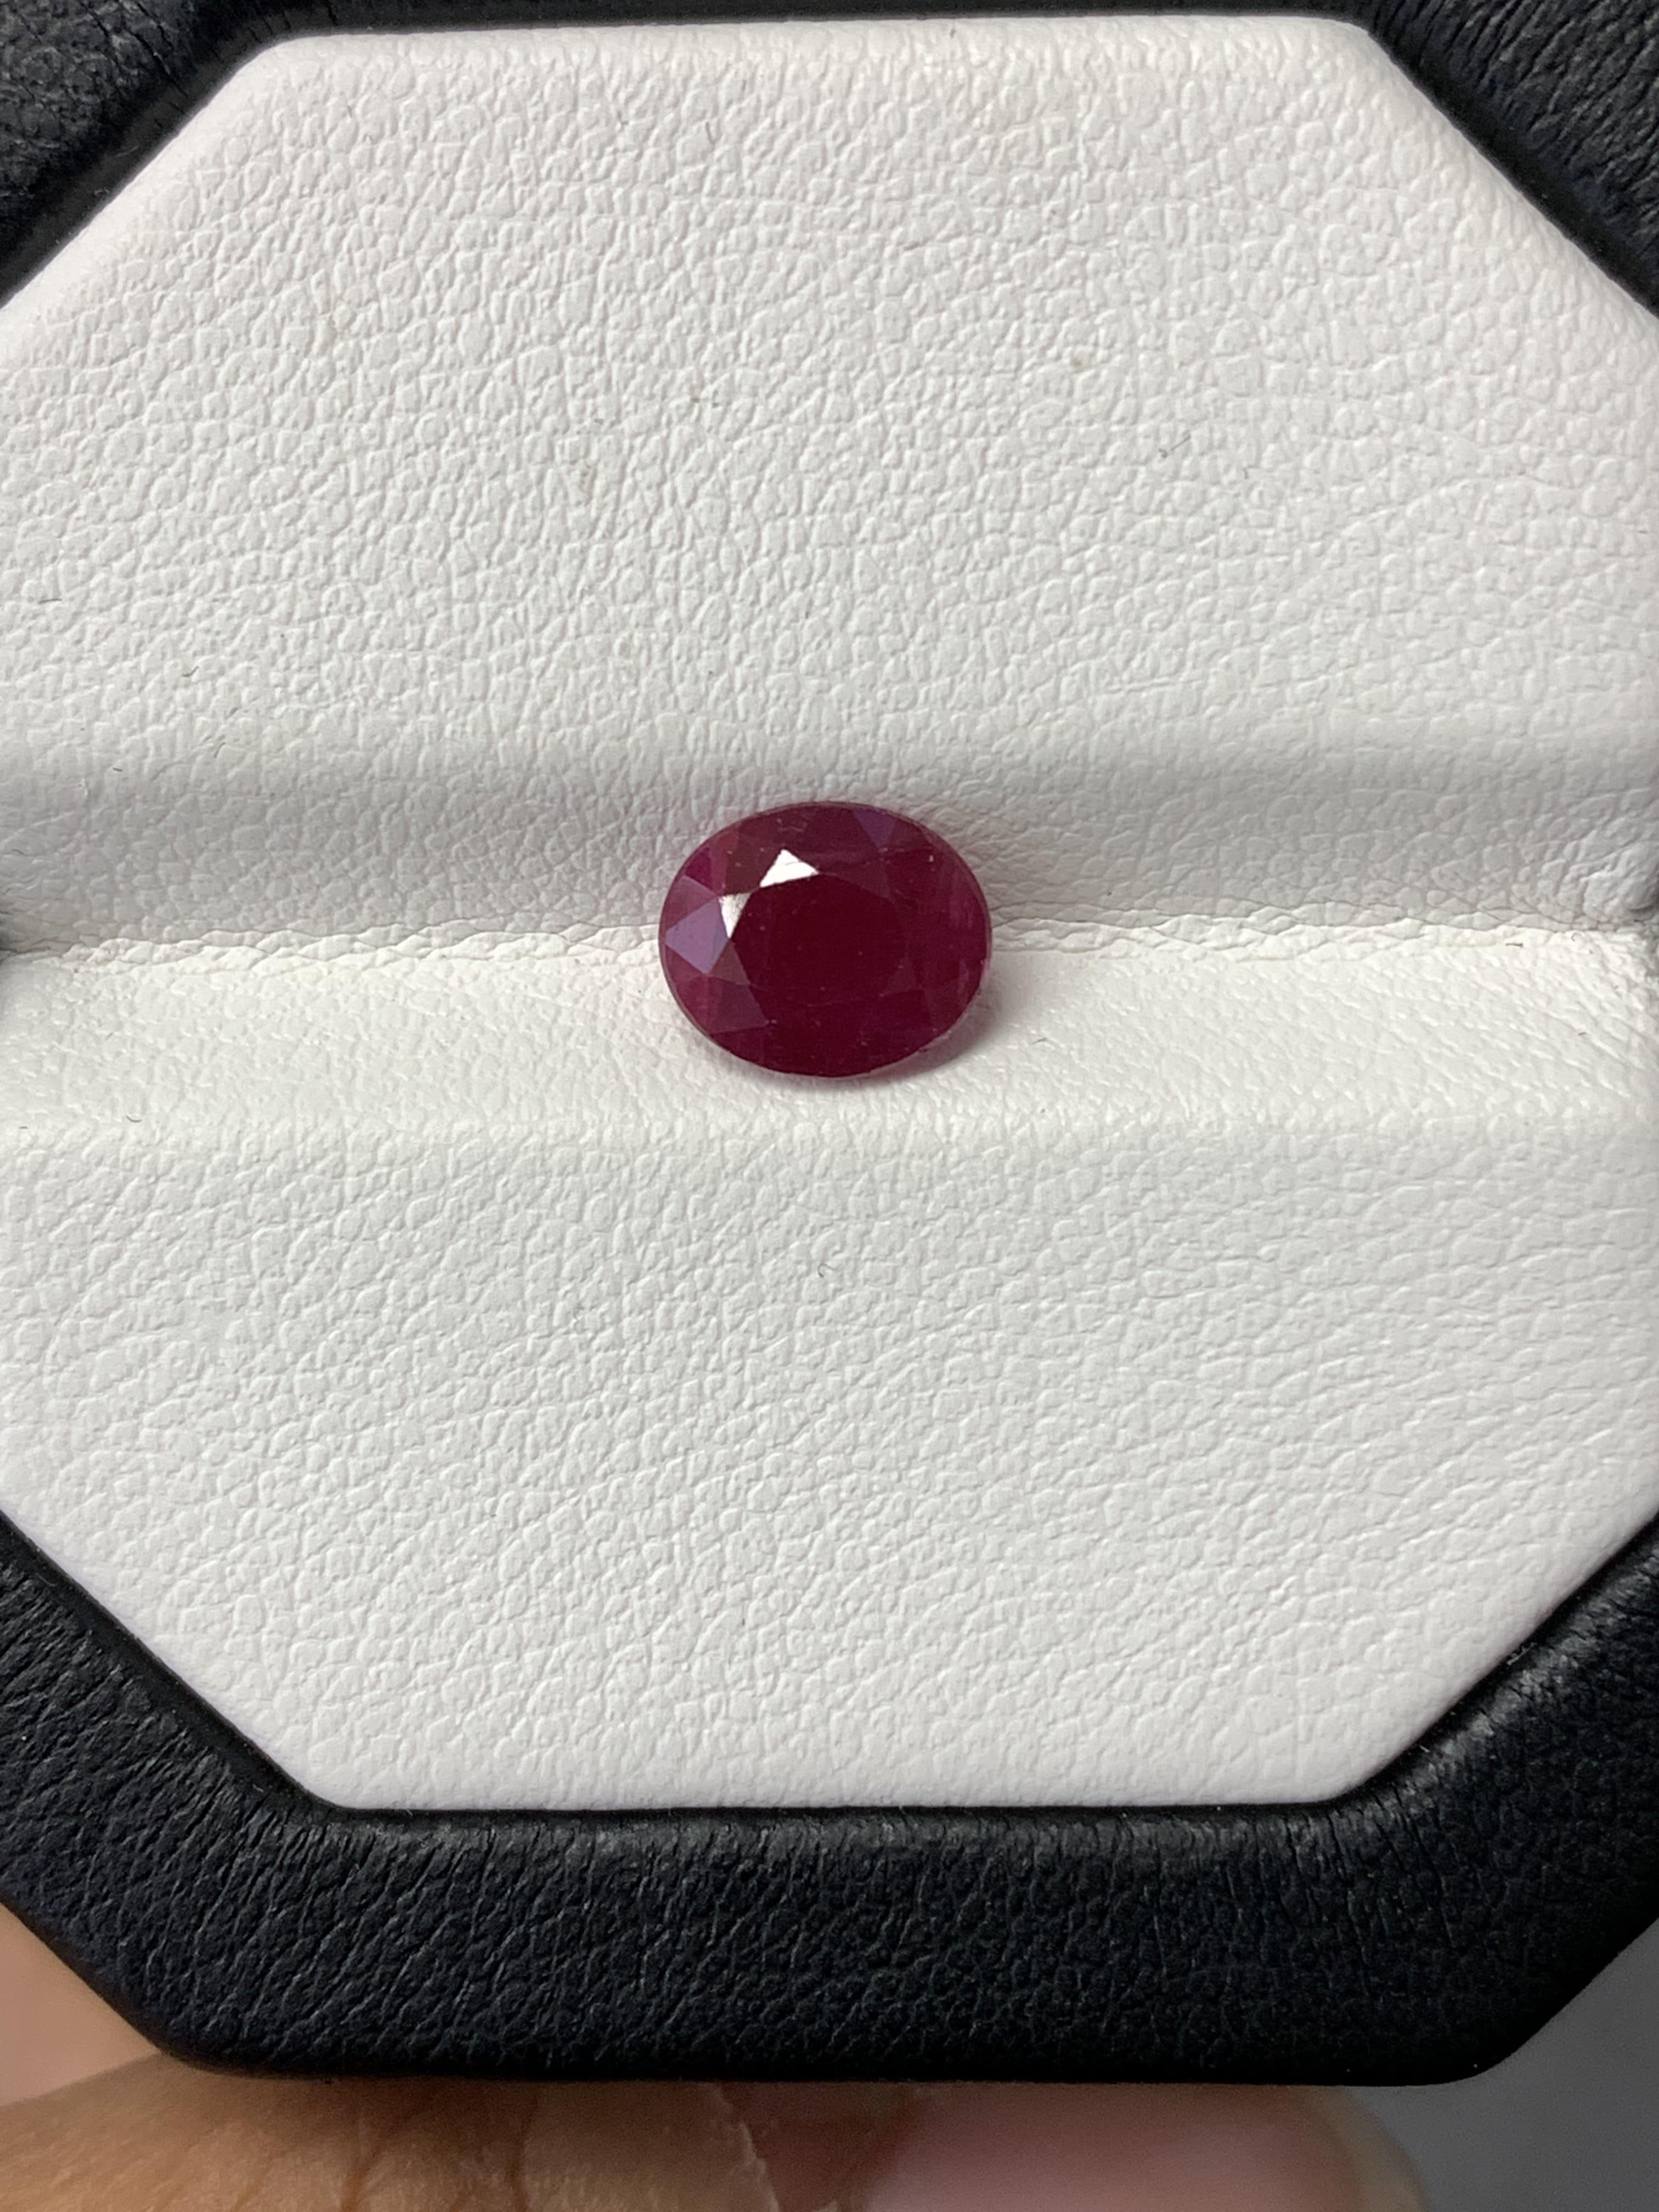 No-Heat 1.78 Carat Oval Cut Natural Ruby Pigeon Blood For Sale 4